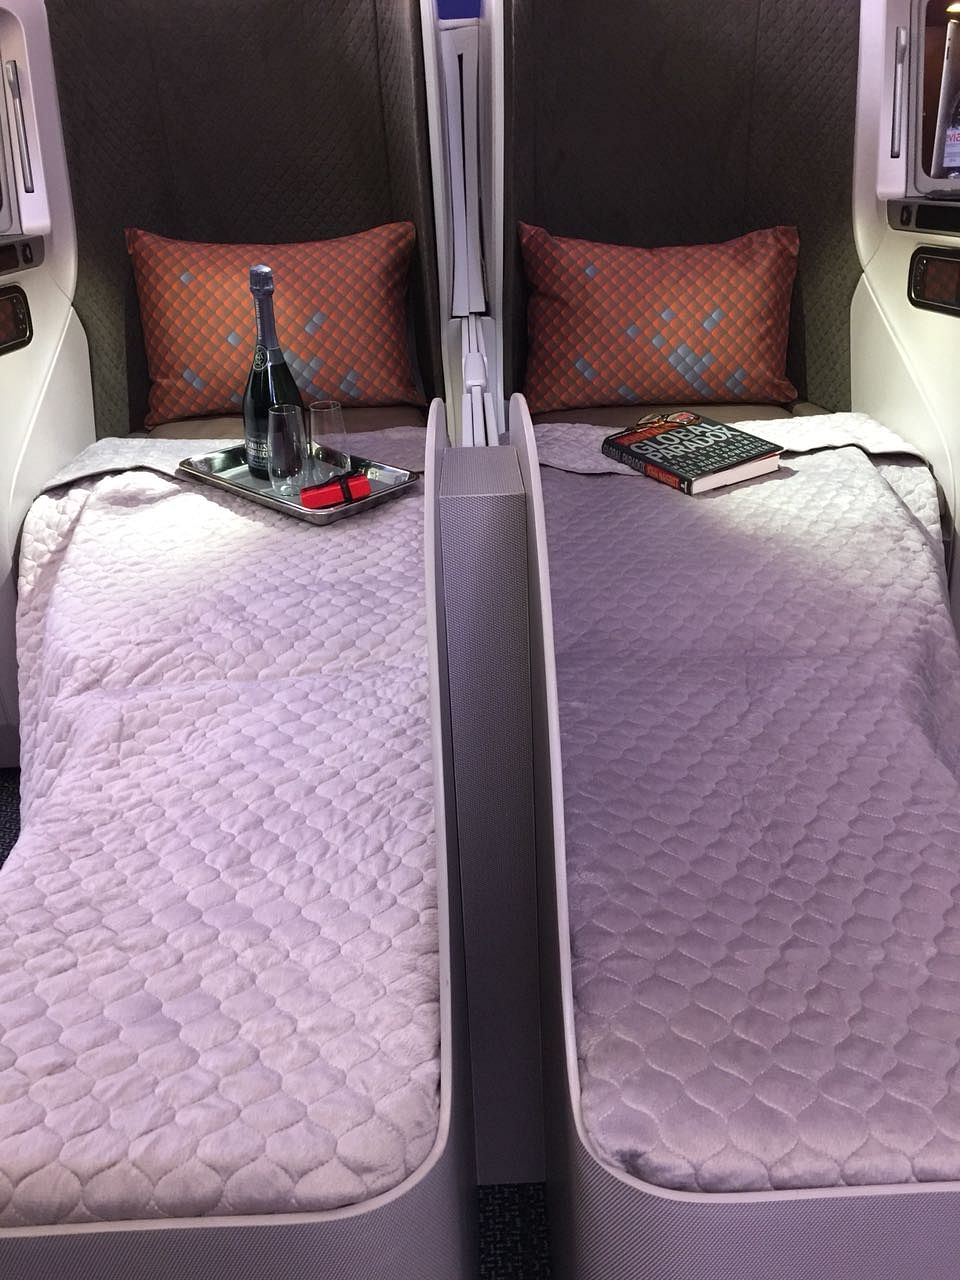 Singapore Airlines unveils the next generation of regional cabin products, fitted on its new Boeing 787-10 fleet.